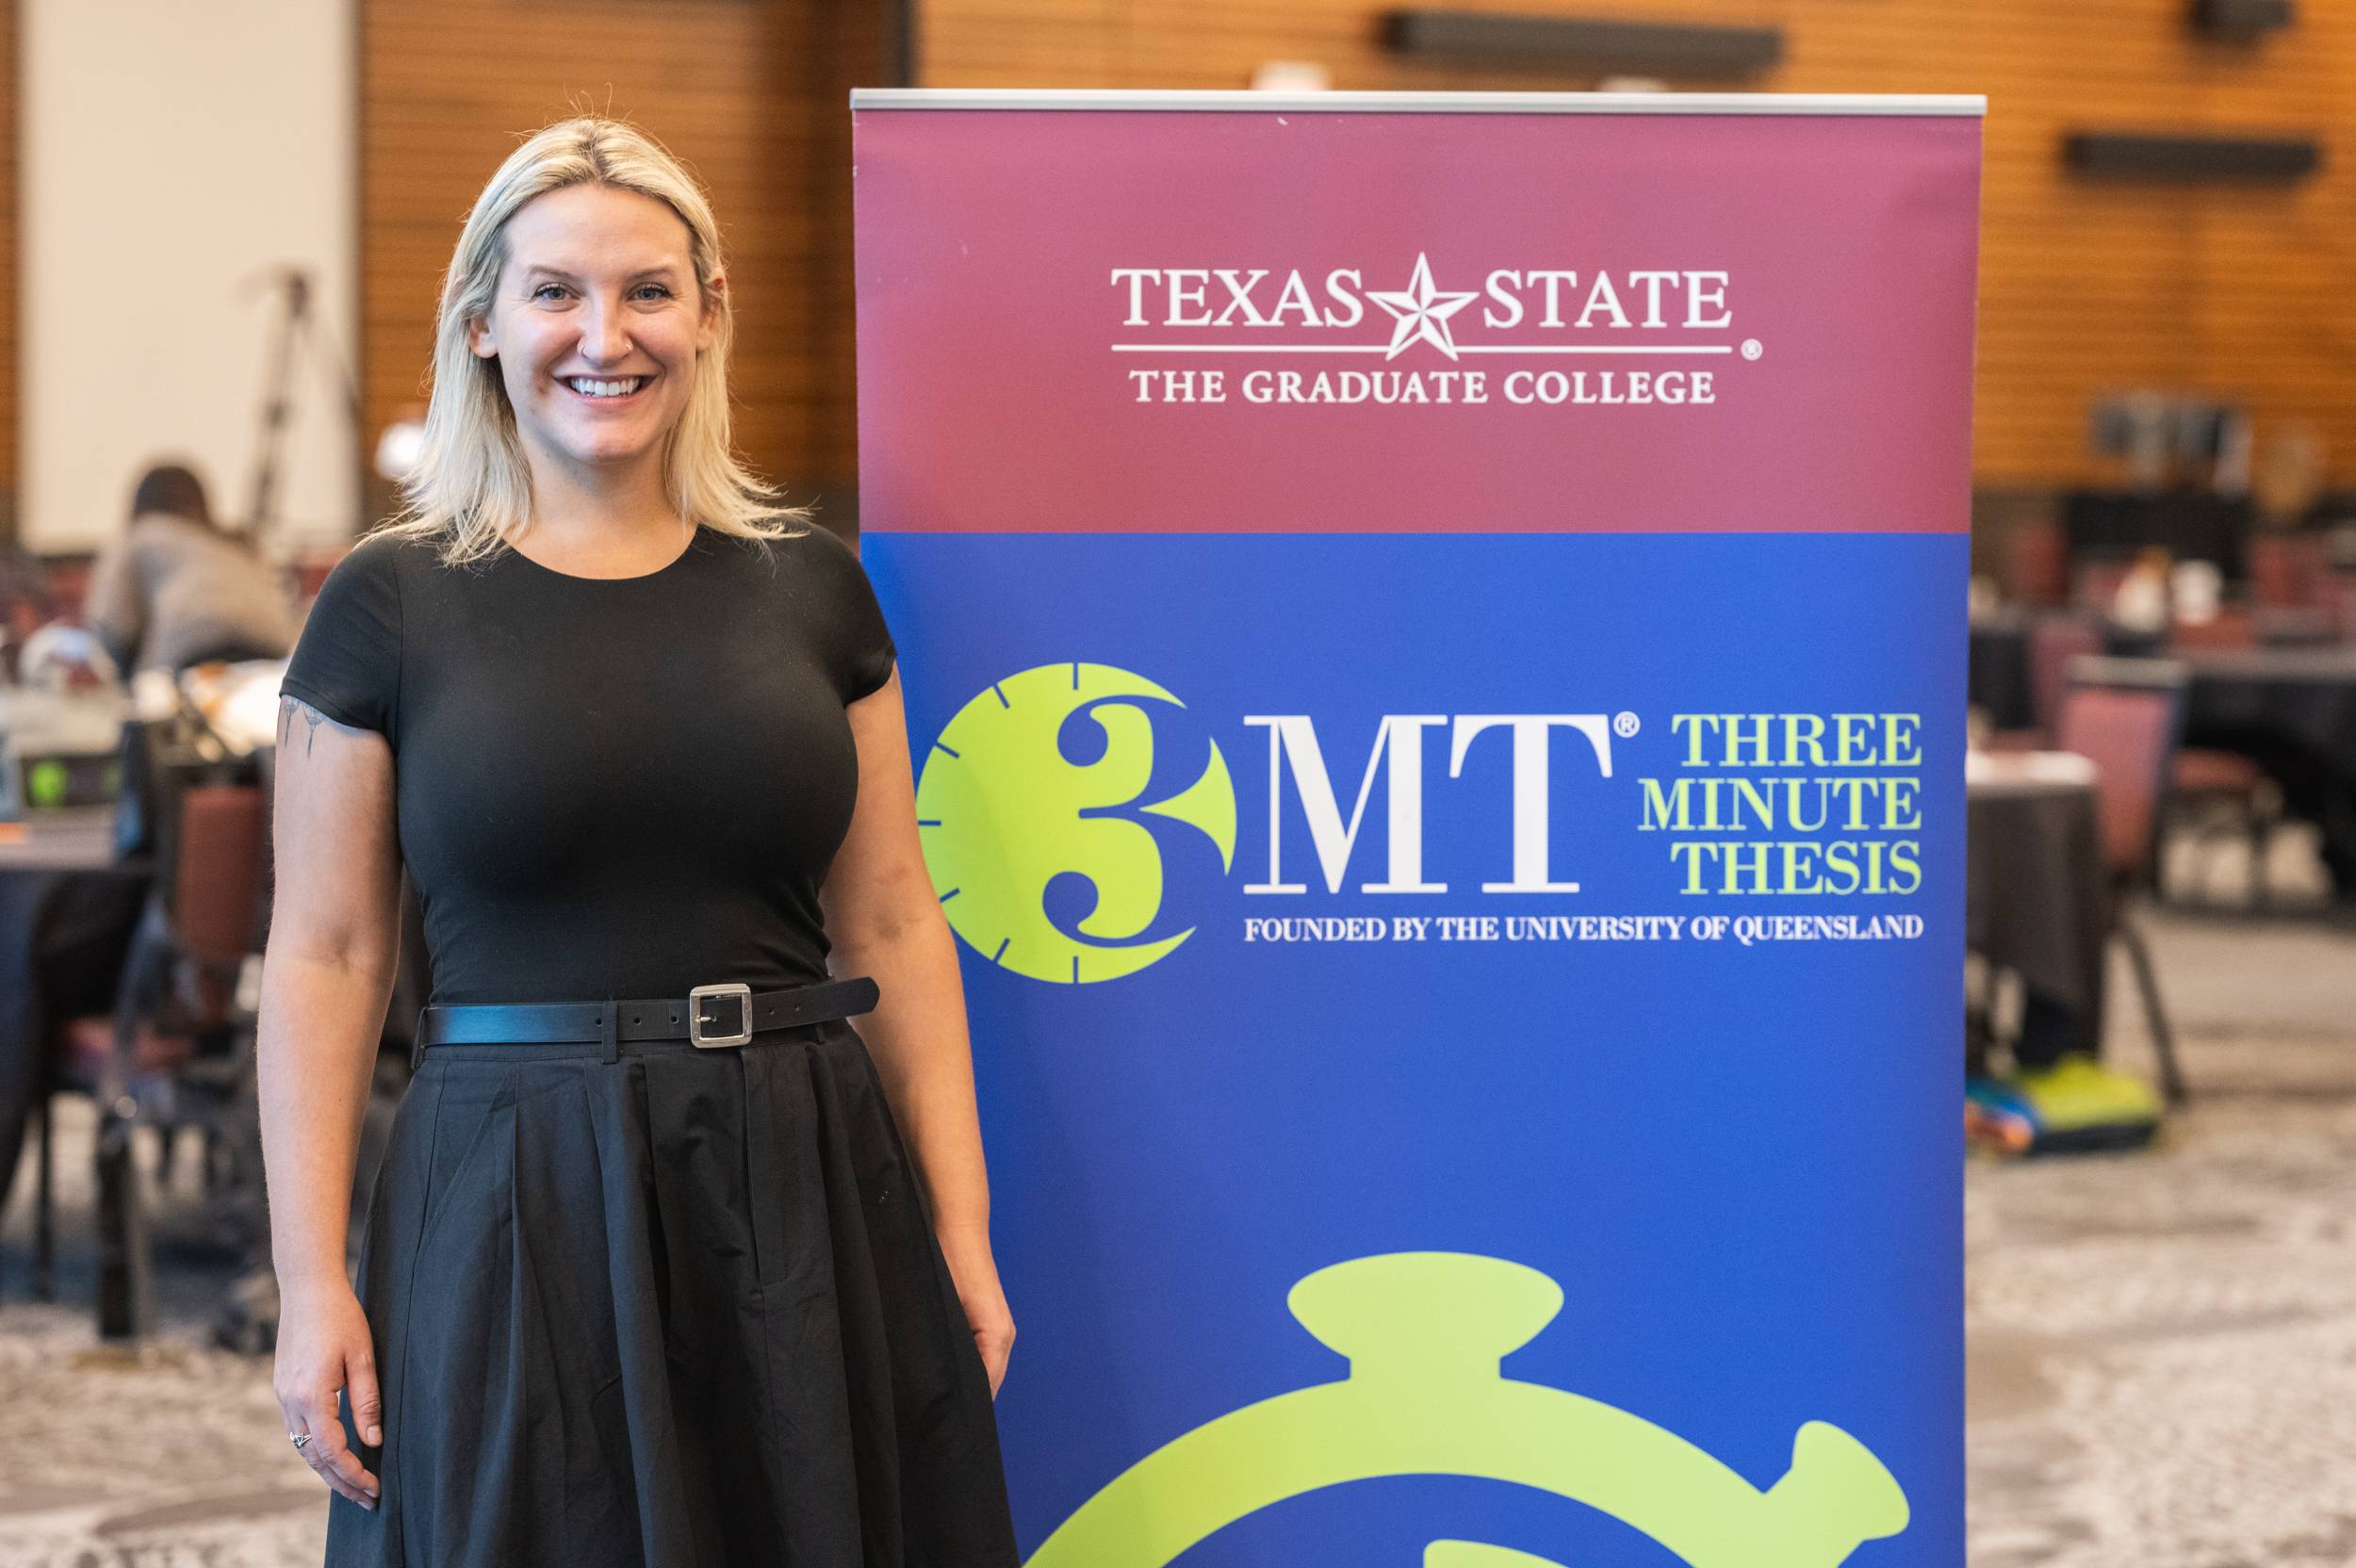 Brianna Fogel standing next to a 3MT sign holding her name tag and runner-up annoucement